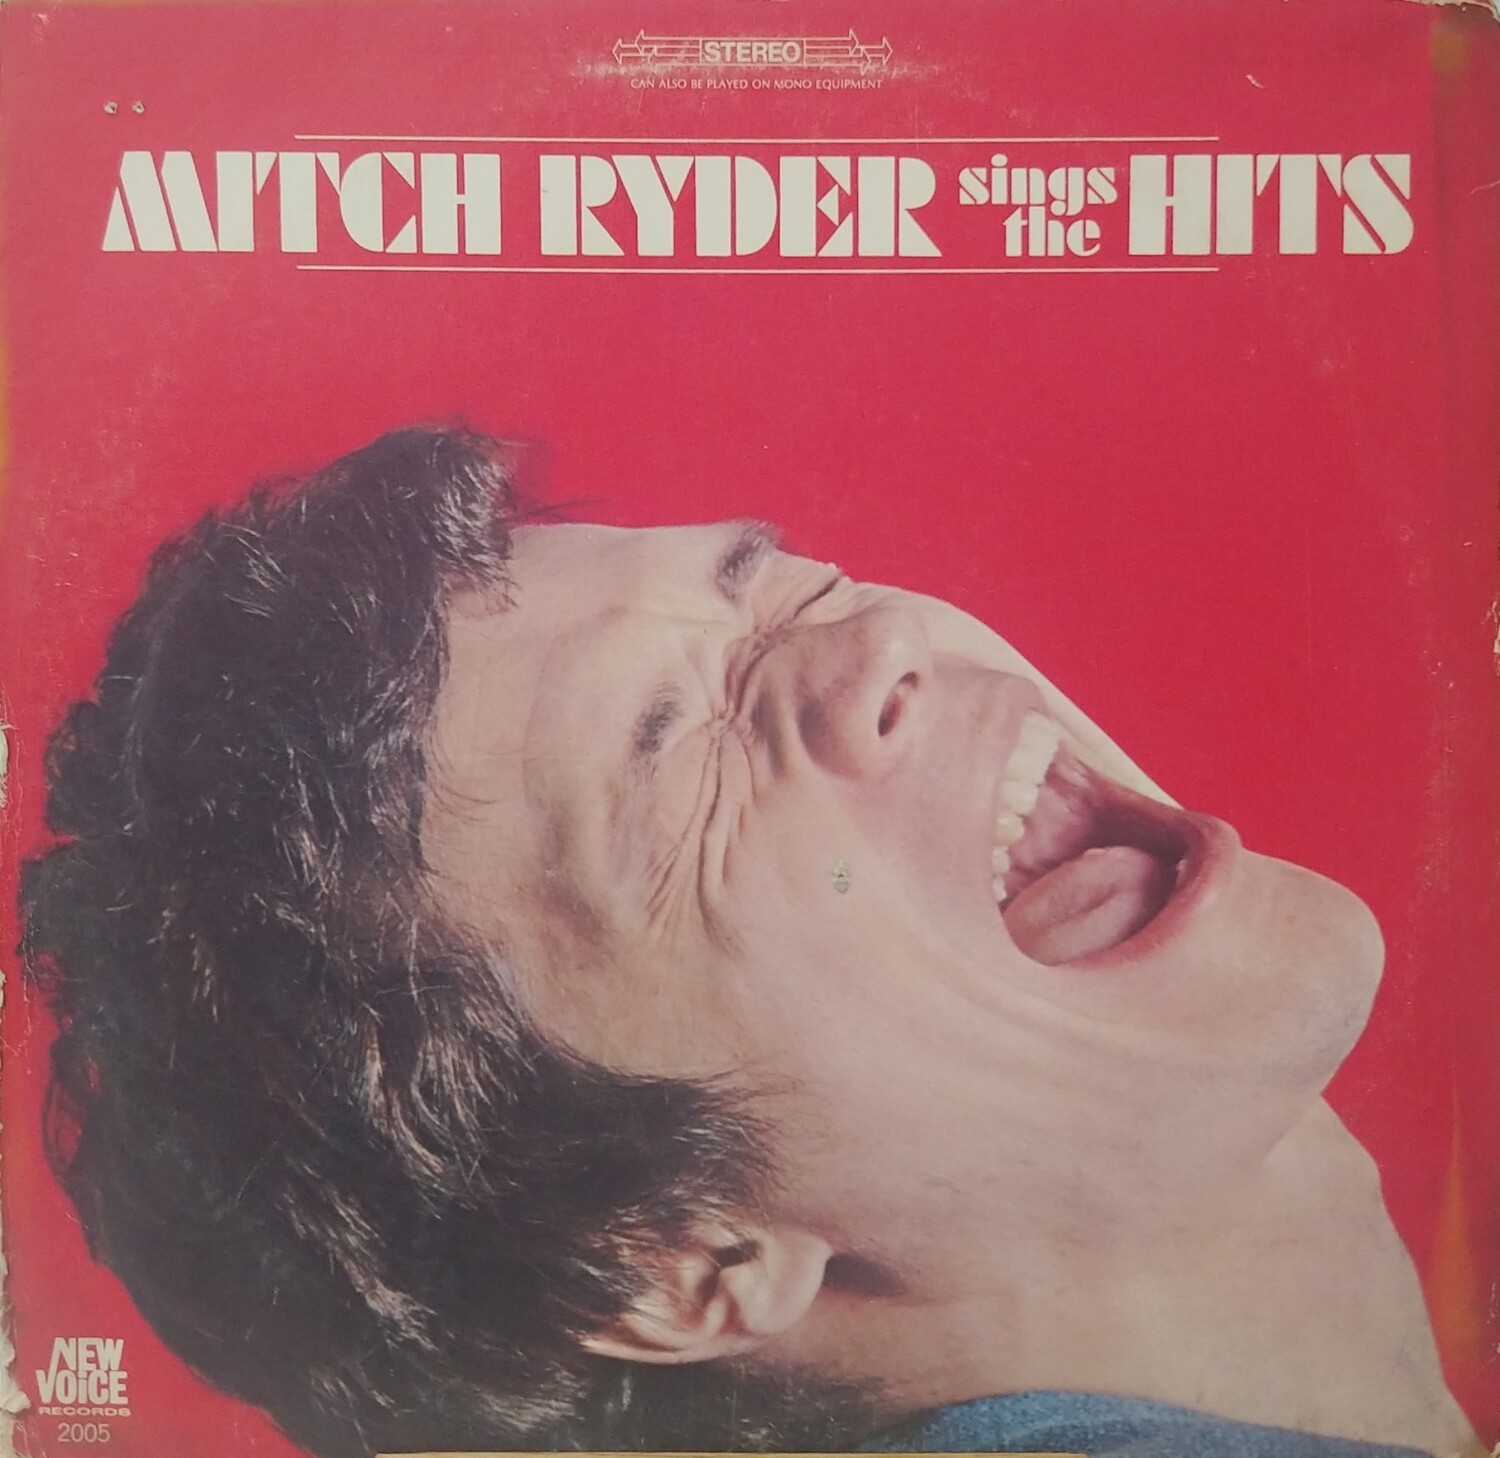 Mitch Ryder - Mitch Ryder Sings the hits